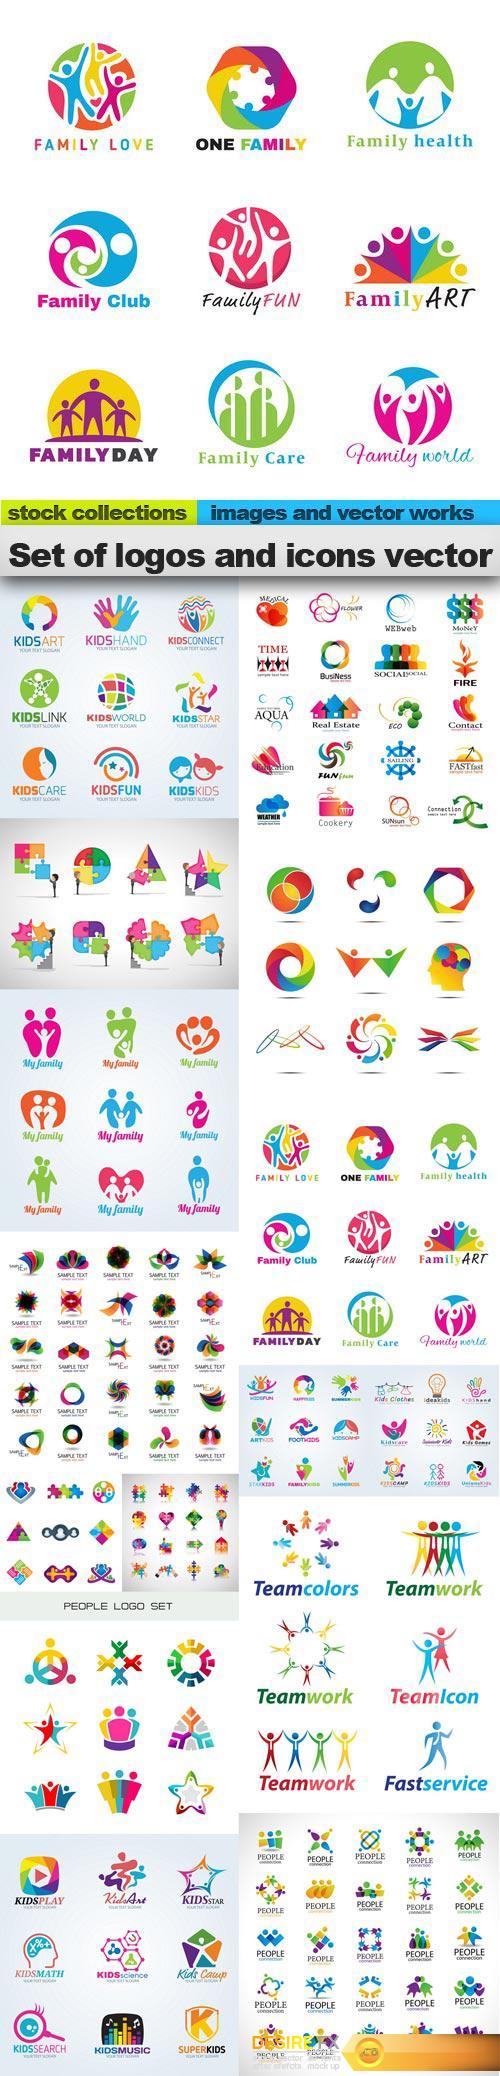 Set of logos and icons vector, 15 x EPS